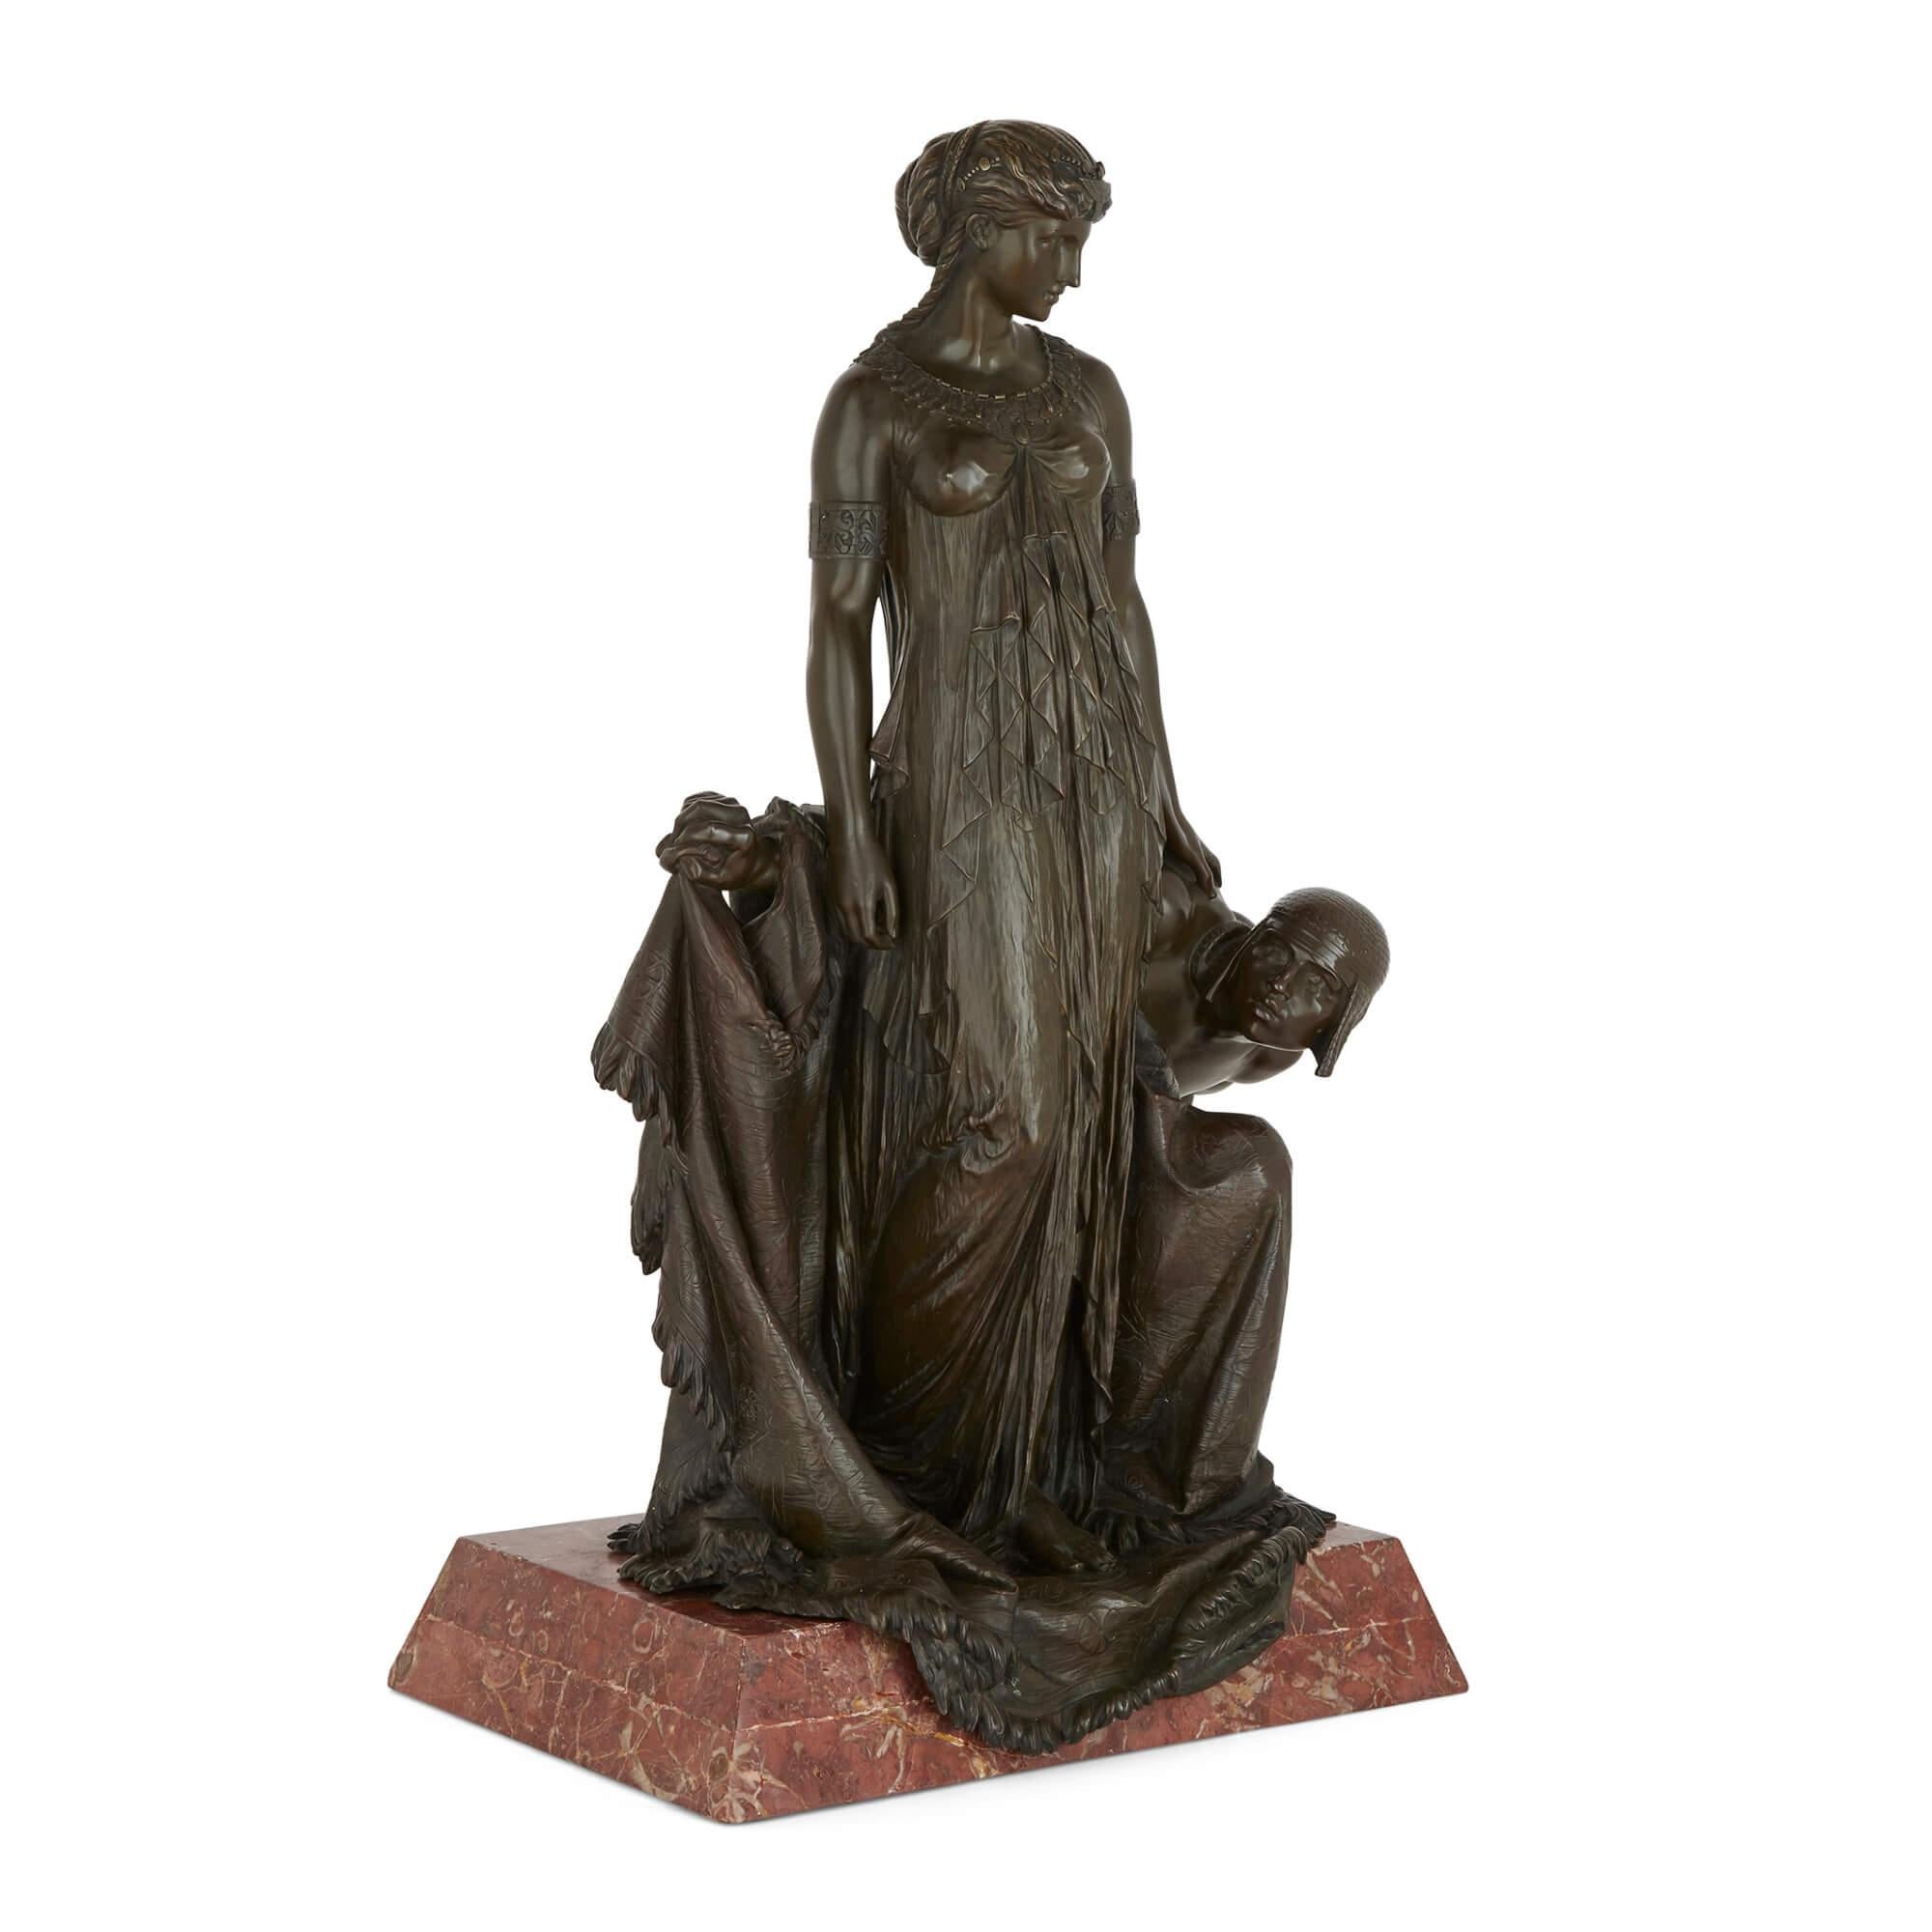 Unveiling the Princess: a large patinated bronze group by H. Dumaige
French, Late 19th Century
Height 82cm, width 46cm, depth 38cm

More commonly known for his works based upon Classical themes and figures, Etienne Henry Dumaige was a widely